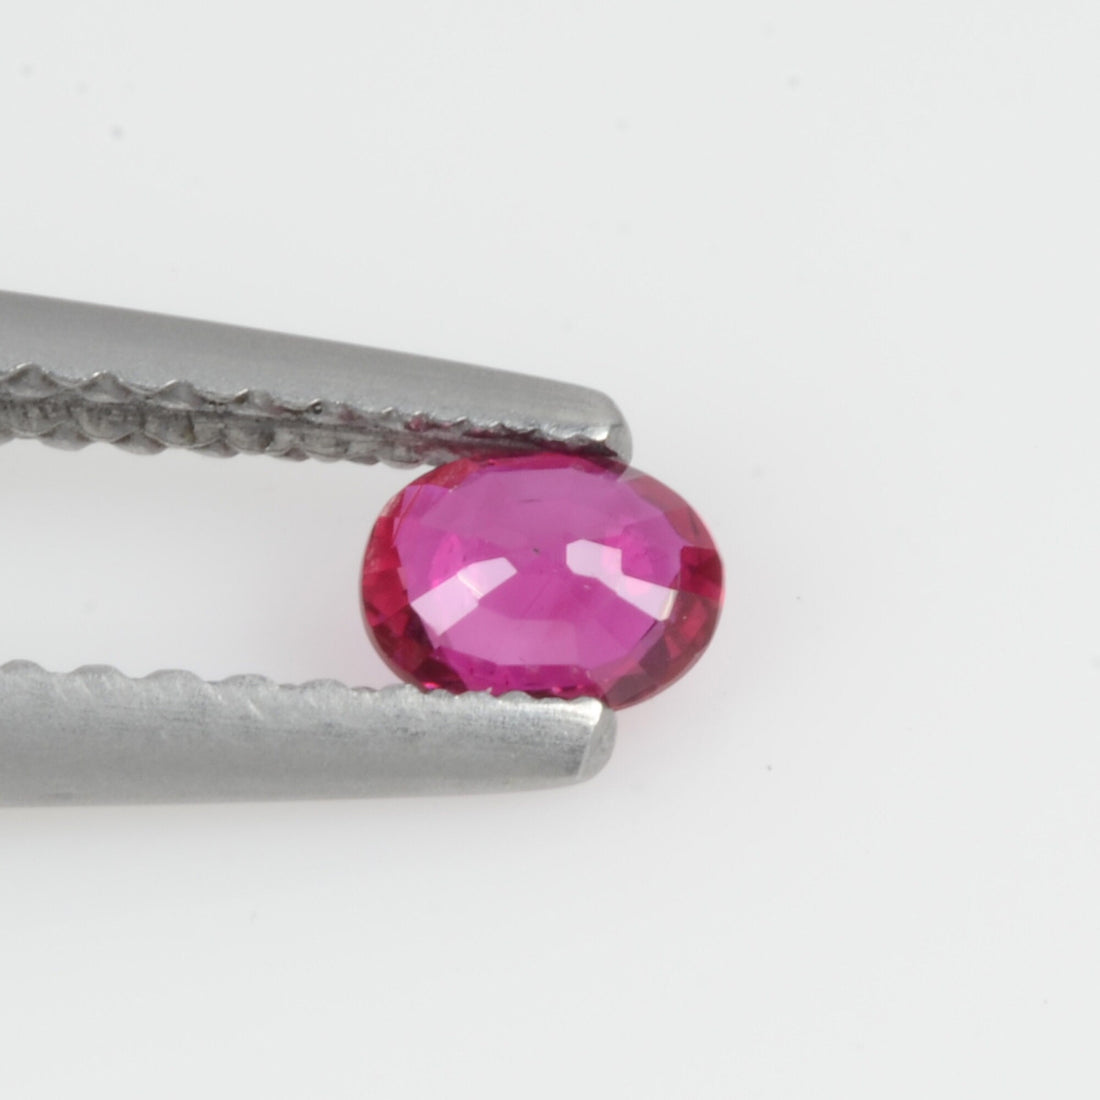 0.21 Cts Natural Ruby Loose Gemstone Oval Cut